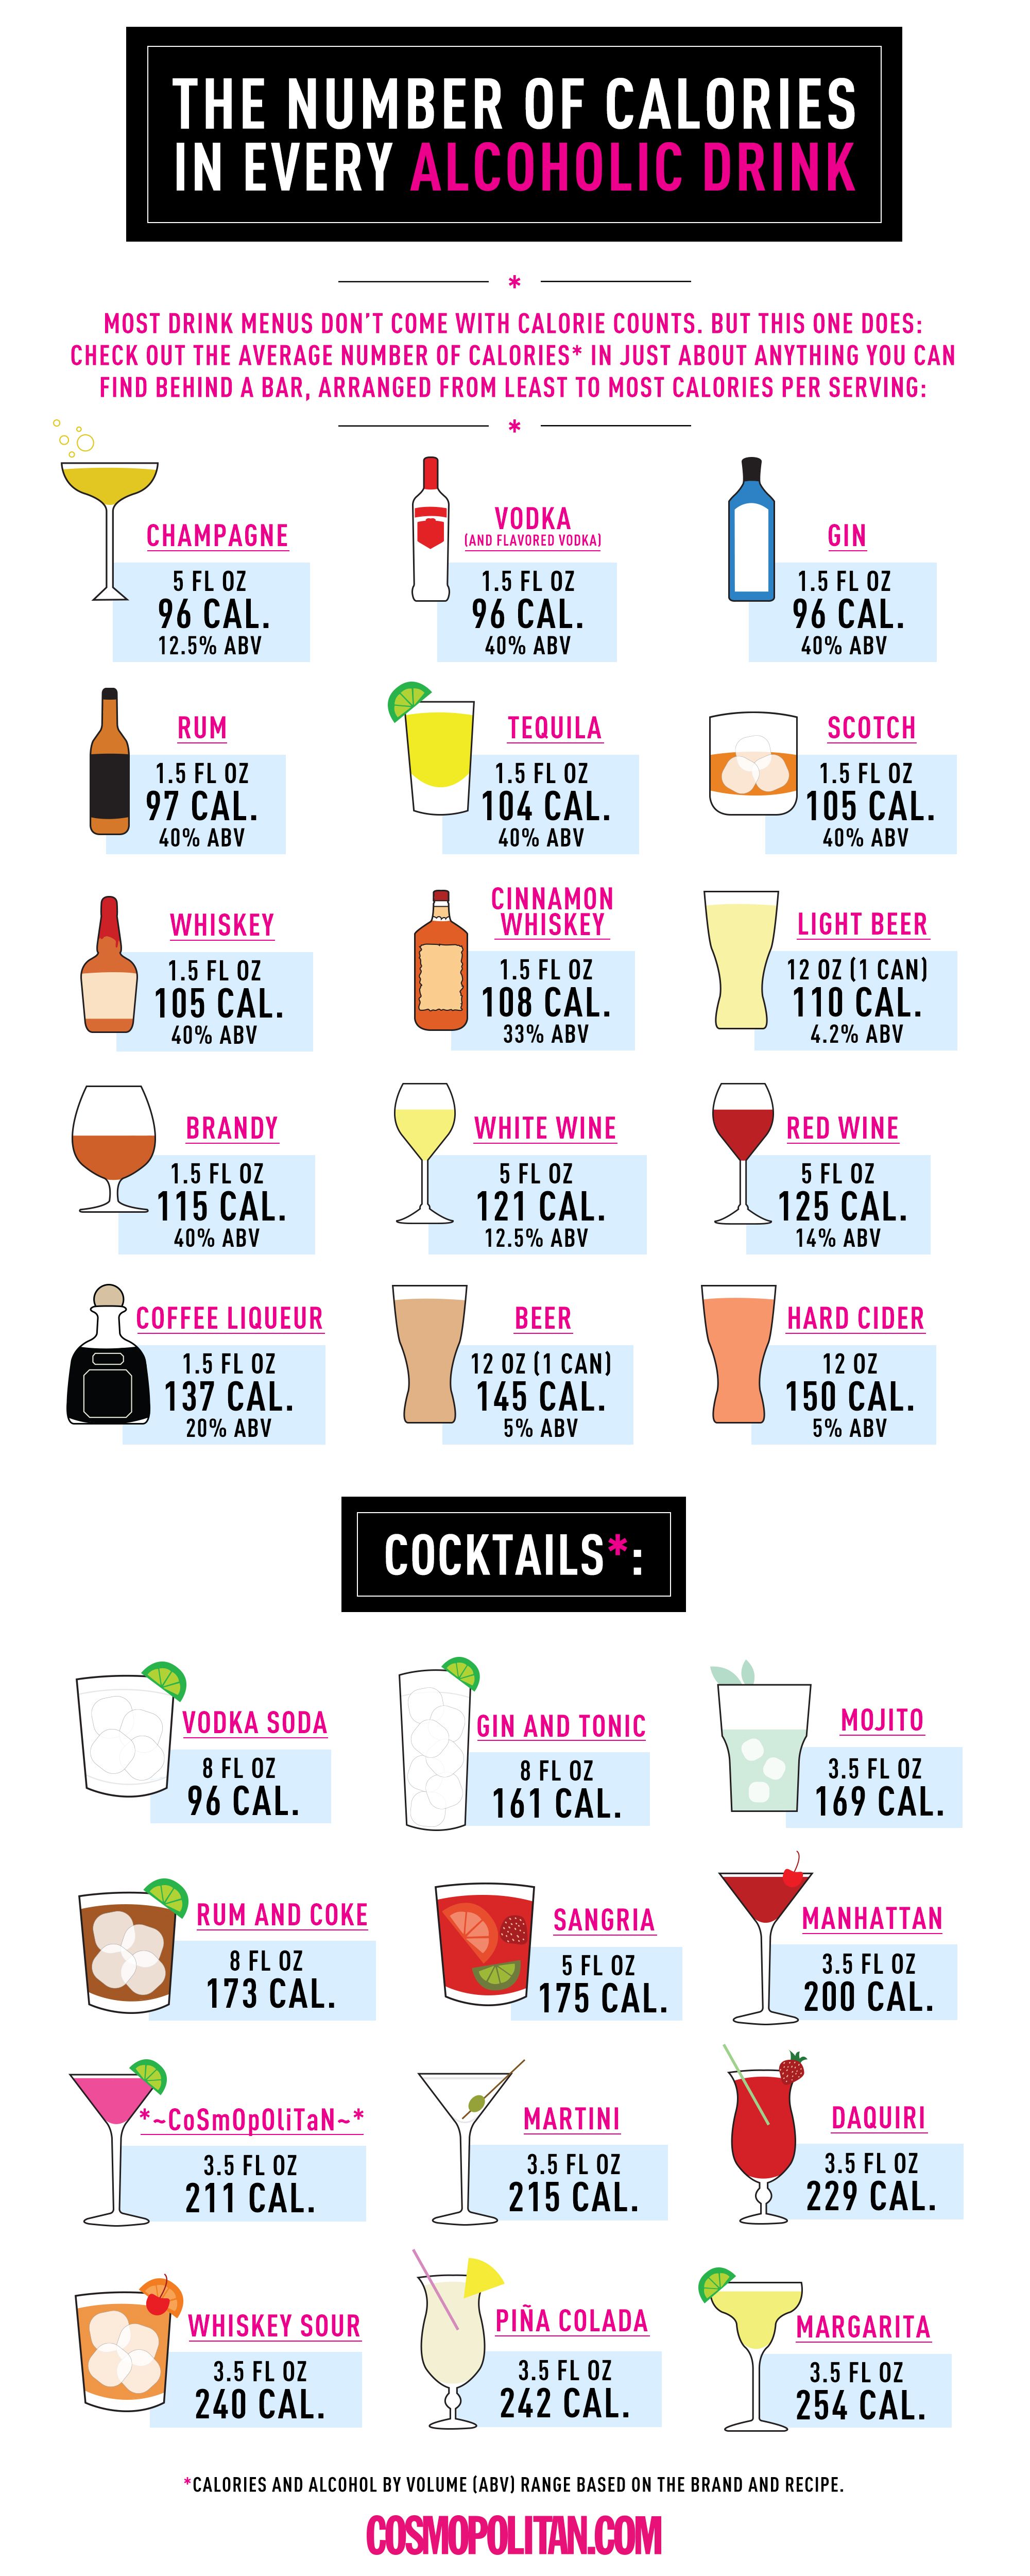 Alcohol Types Chart